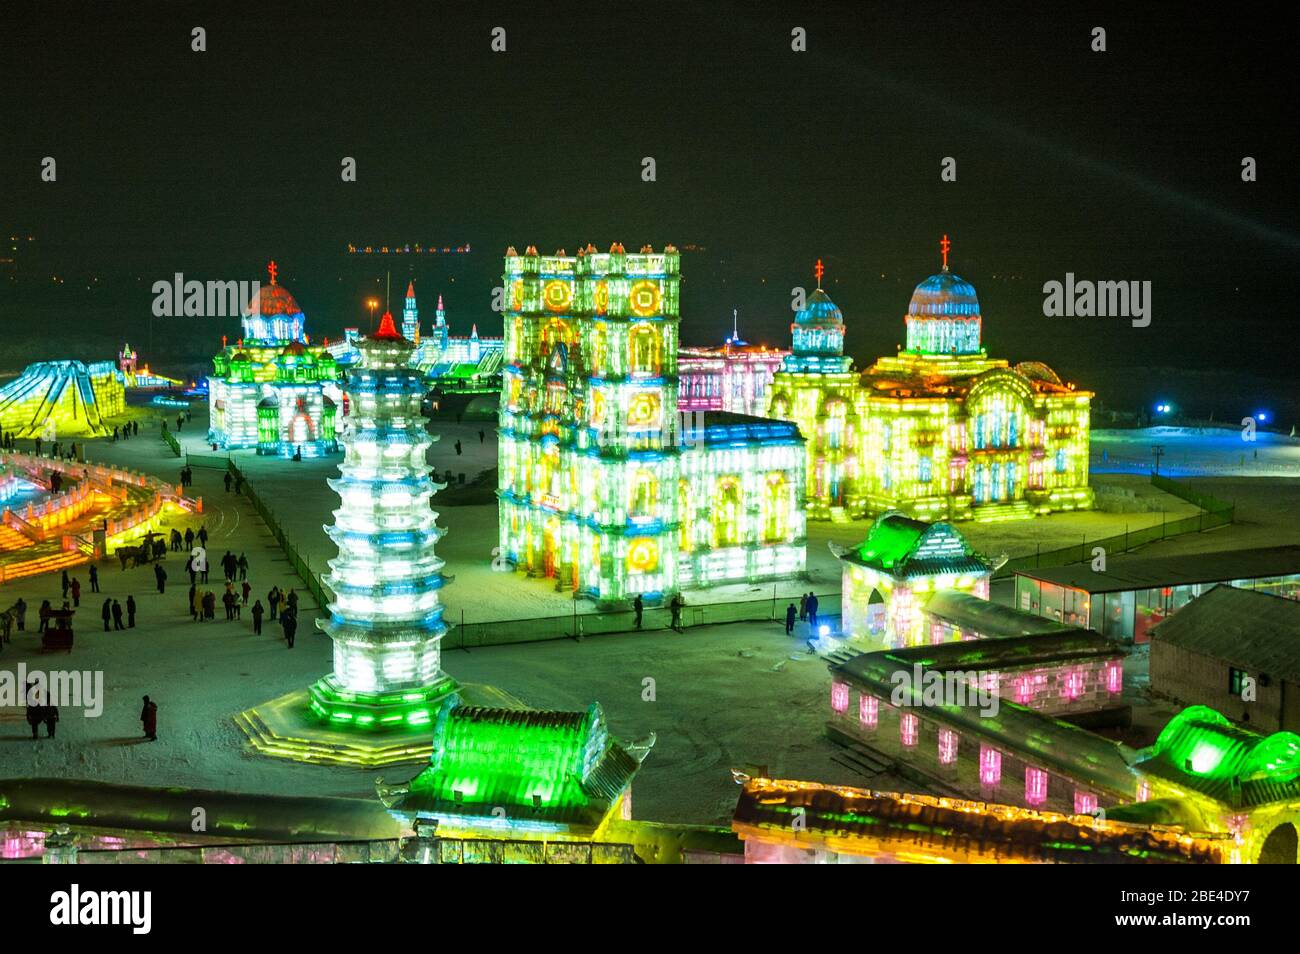 An overview of Snow & Ice World in Harbin showing ice sculptures of churches. Stock Photo